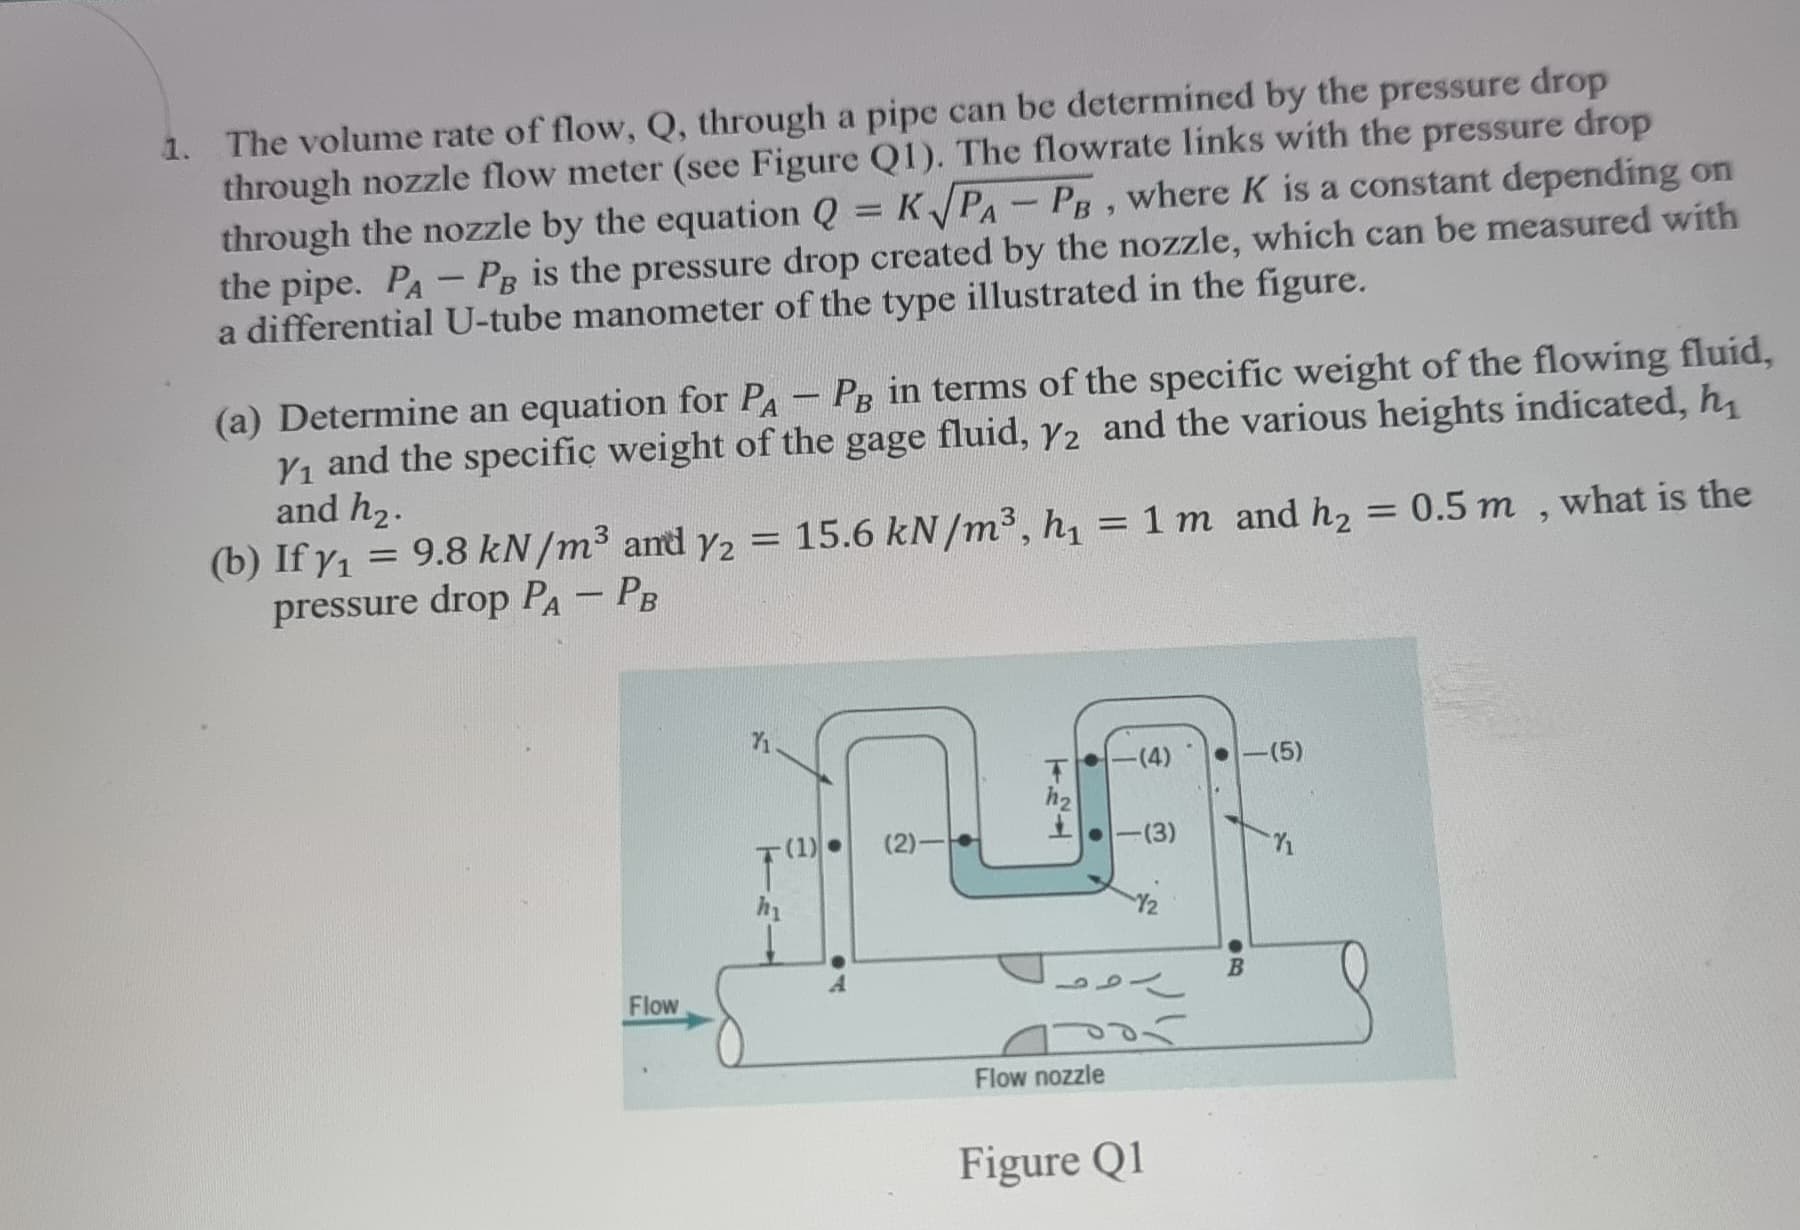 1. The volume rate of flow, Q, through a pipe can be determined by the pressure drop
through nozzle flow meter (see Figure Q1). The flowrate links with the pressure drop
through the nozzle by the equation Q = K√PA-PB, where K is a constant depending on
the pipe. PA-PB is the pressure drop created by the nozzle, which can be measured with
a differential U-tube manometer of the type illustrated in the figure.
(a) Determine an equation for PA-PB in terms of the specific weight of the flowing fluid,
Y₁ and the specific weight of the gage fluid, Y2 and the various heights indicated, h
and h₂.
(b) If y₁= 9.8 kN/m³ and y2 = 15.6 kN/m³, h₁ = 1 m and h₂ = 0.5 m, what is the
pressure drop PA - PB
Flow
(1)
(2)-
124
-(4)
Flow nozzle
-(3)
12
رو
bor
Figure Q1
-(5)
B